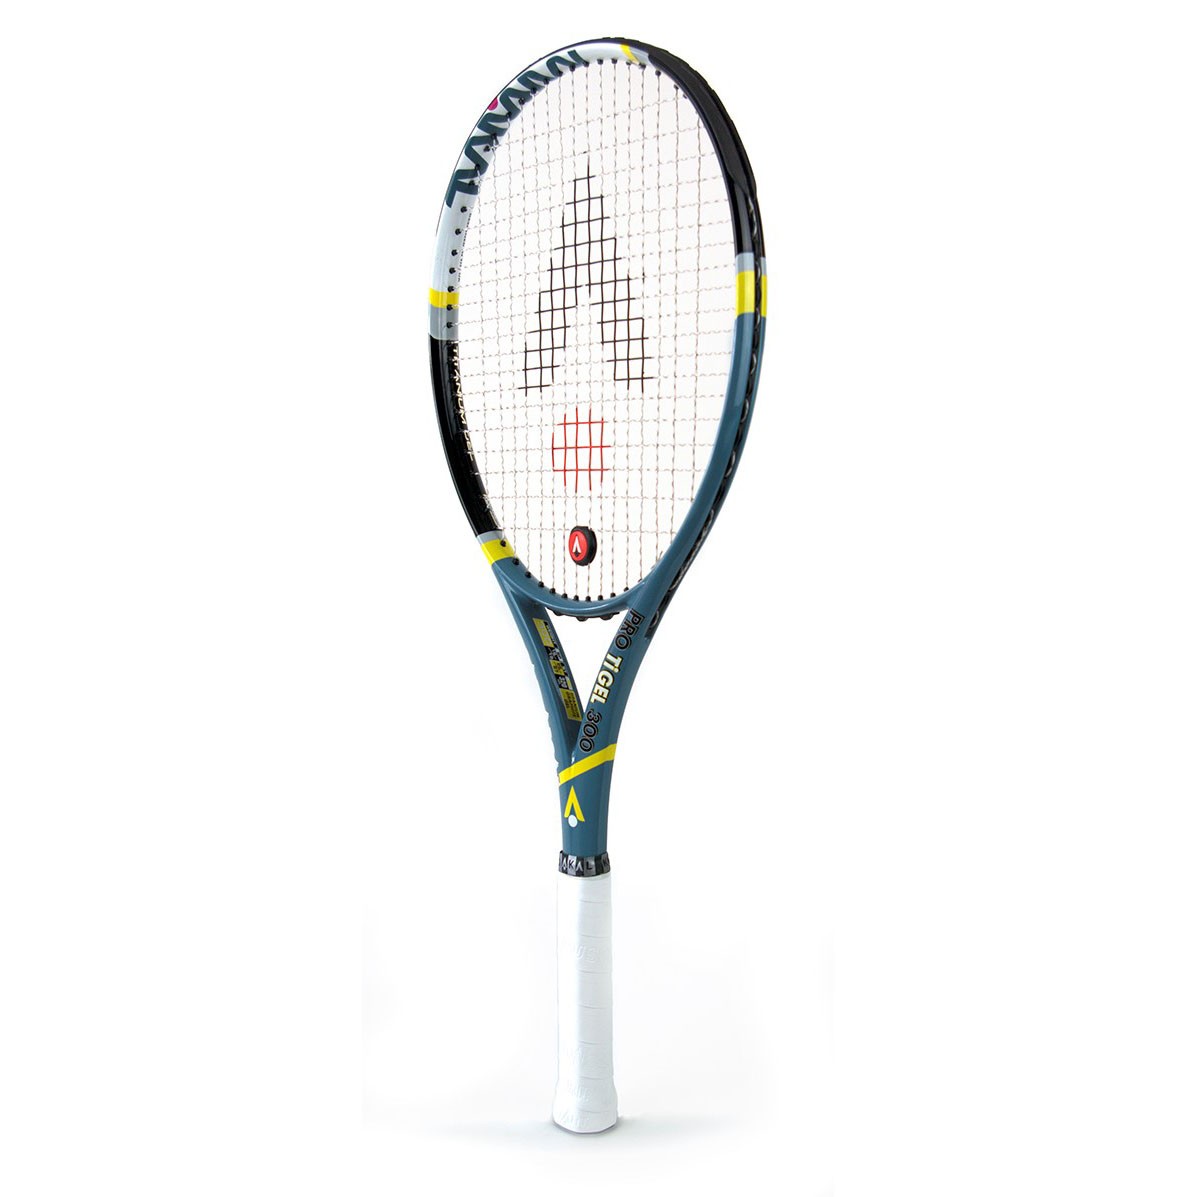 Karakal Pro Ti Gel 300 Tennis Racket complete with dampner and cover rrp £94. 